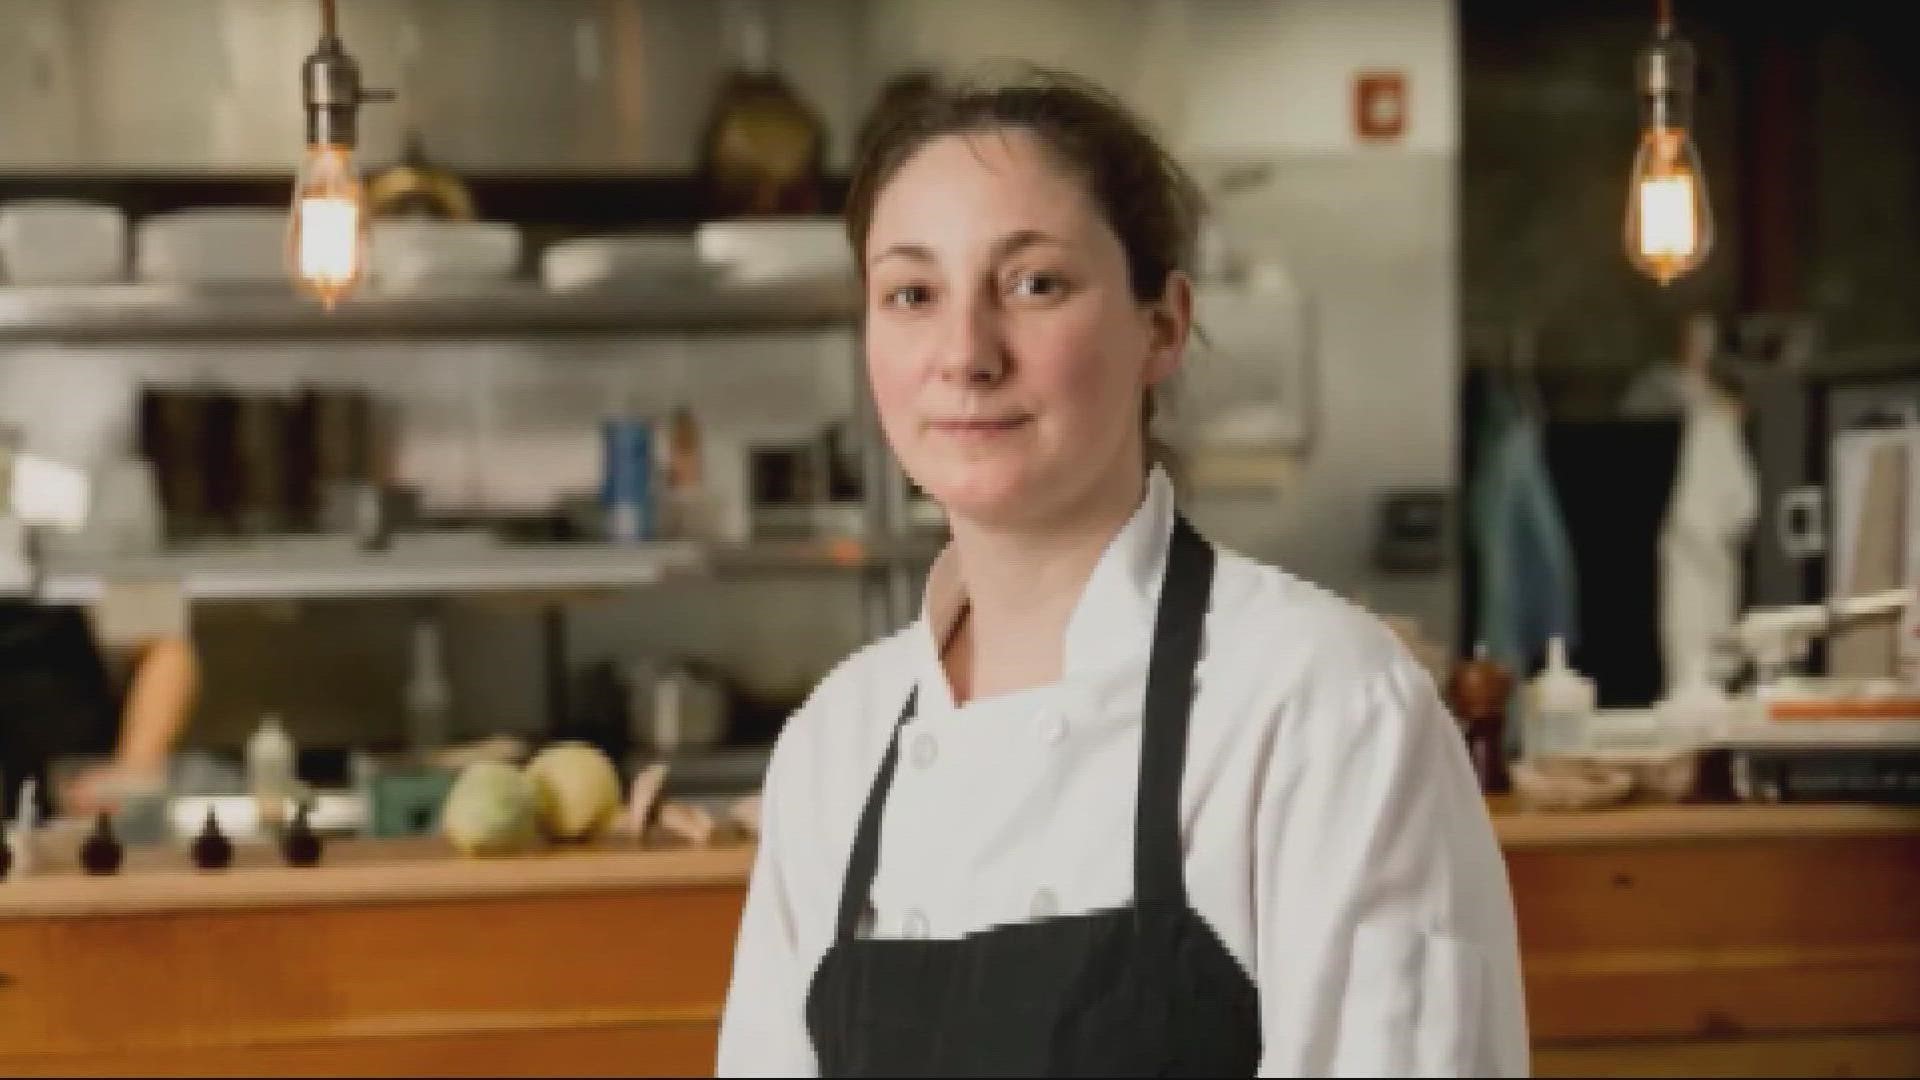 Sarah Pliner previously co-owned Aviary, a restaurant on Northeast Alberta. She was riding her bike when she was struck by a semi-truck on Tuesday.